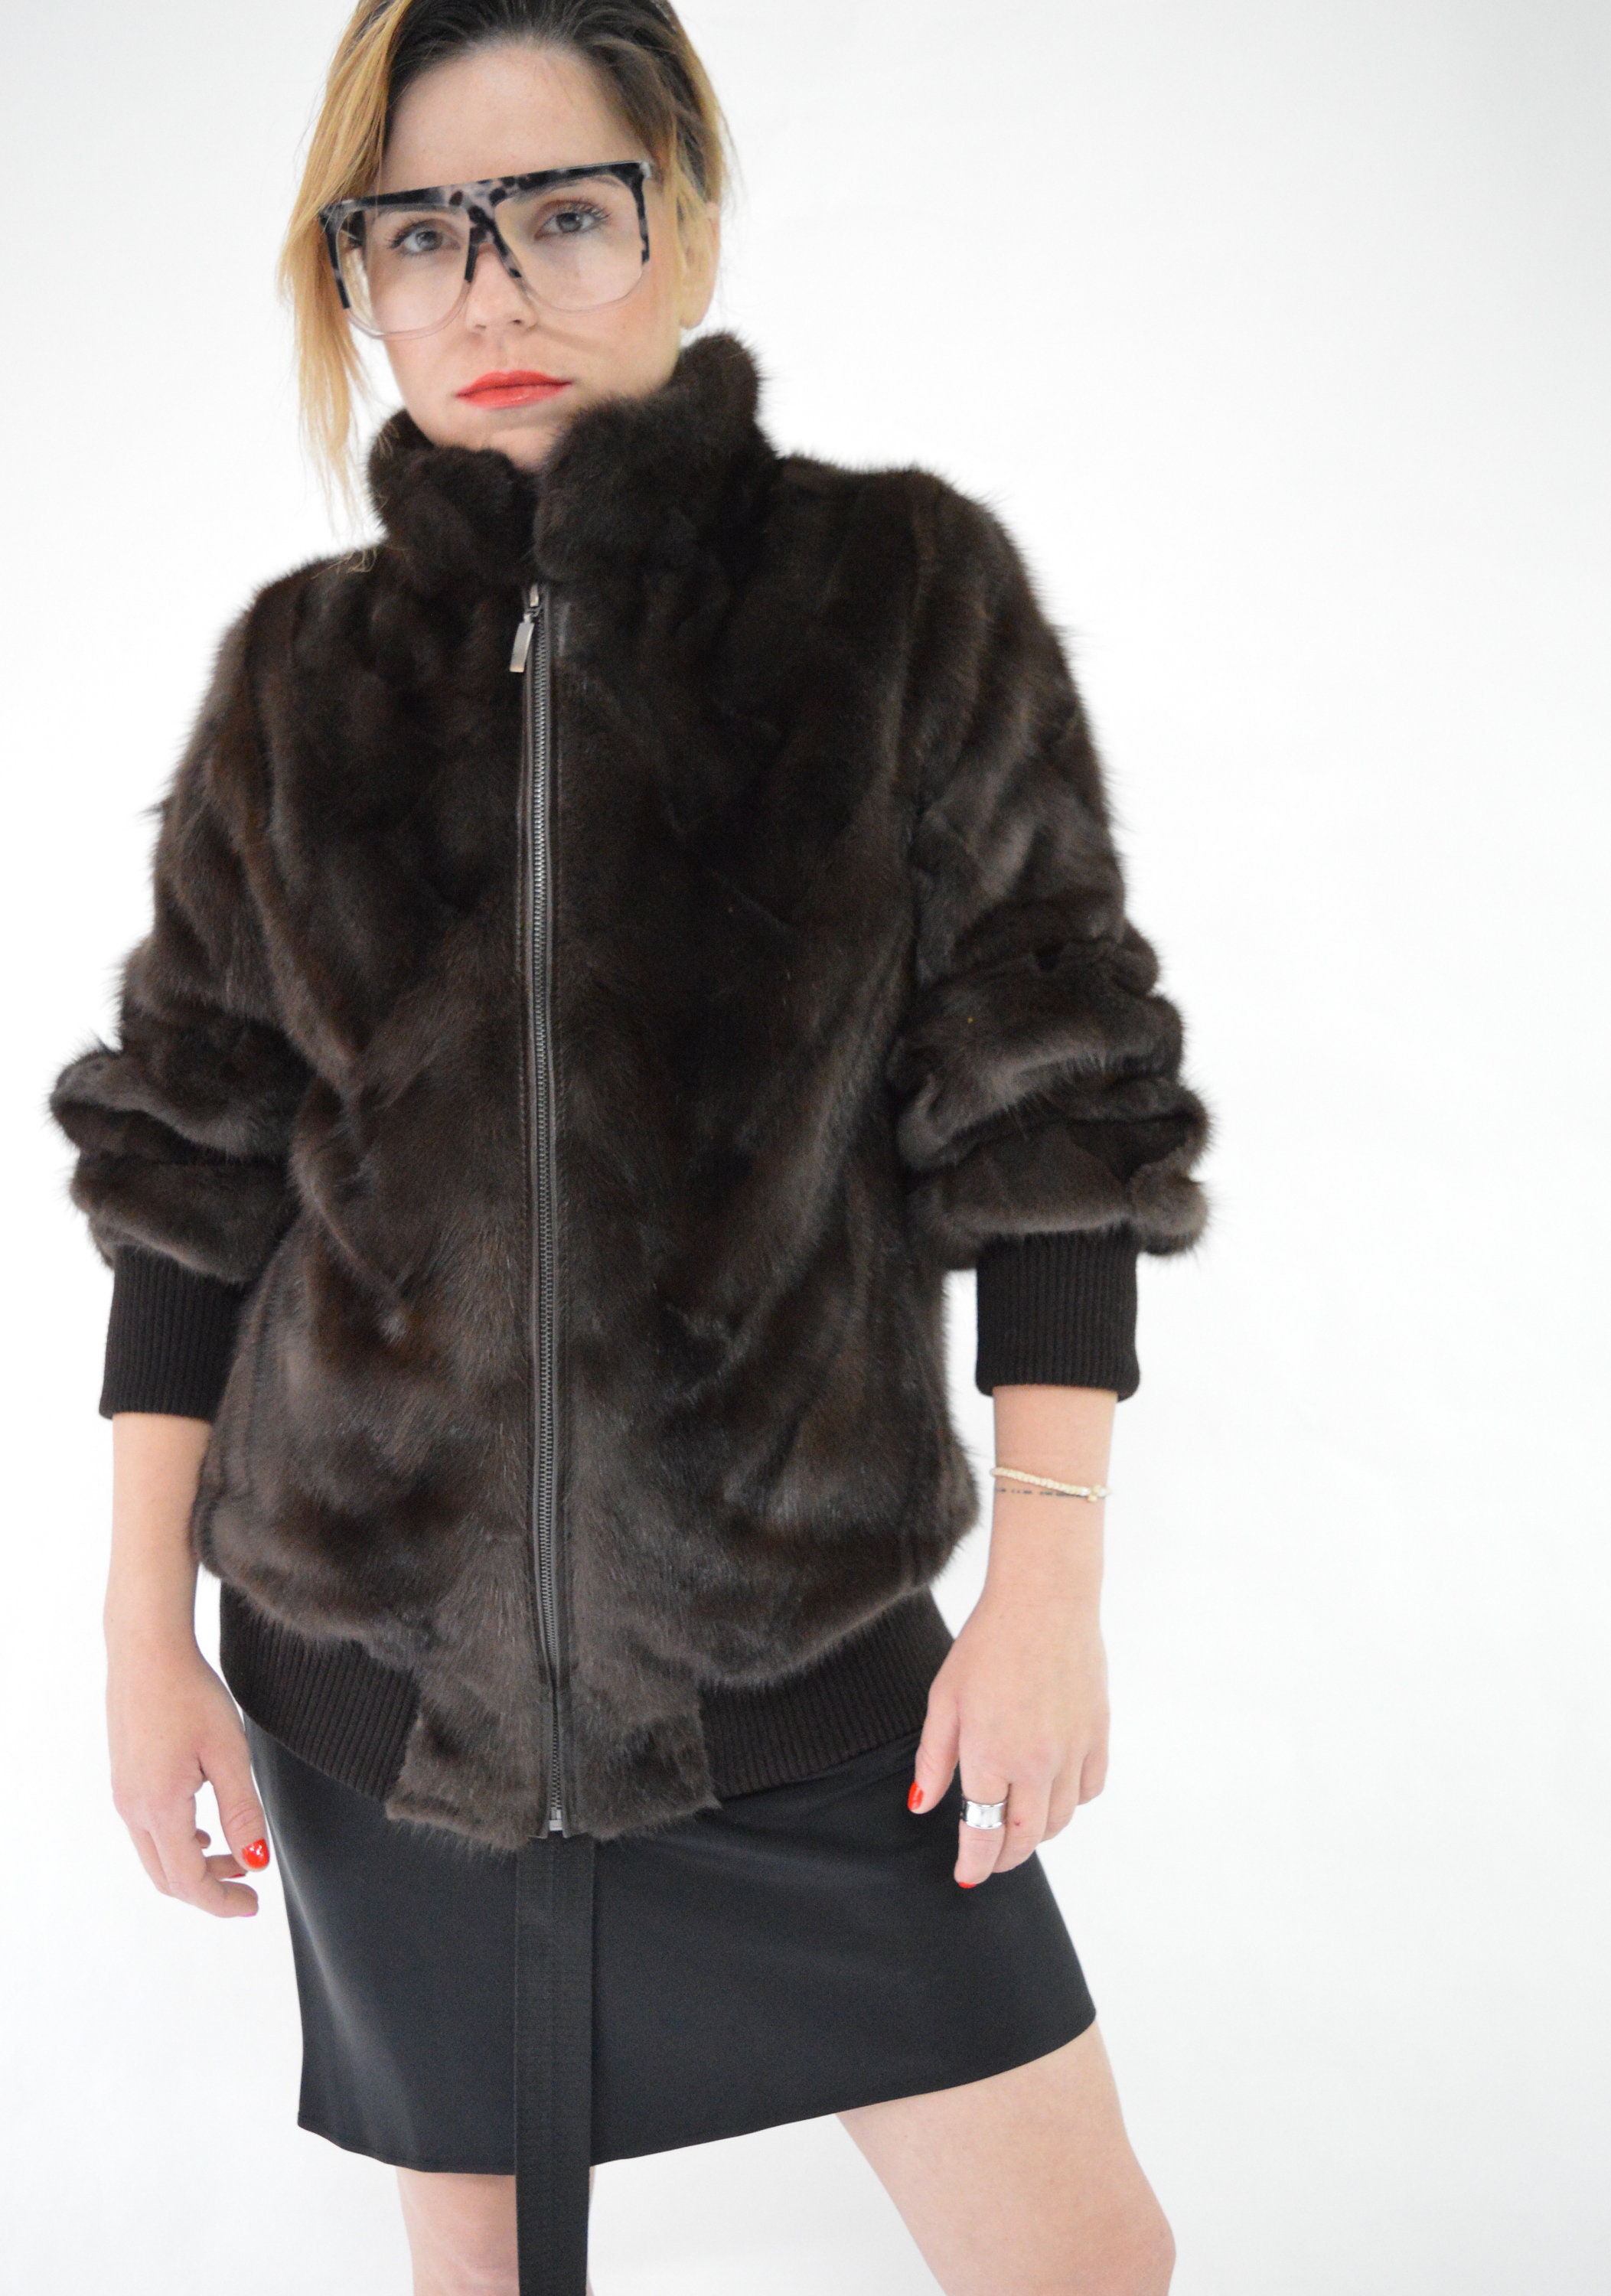 high quality knitted mink fur sweater ,USD1300.eileenhou